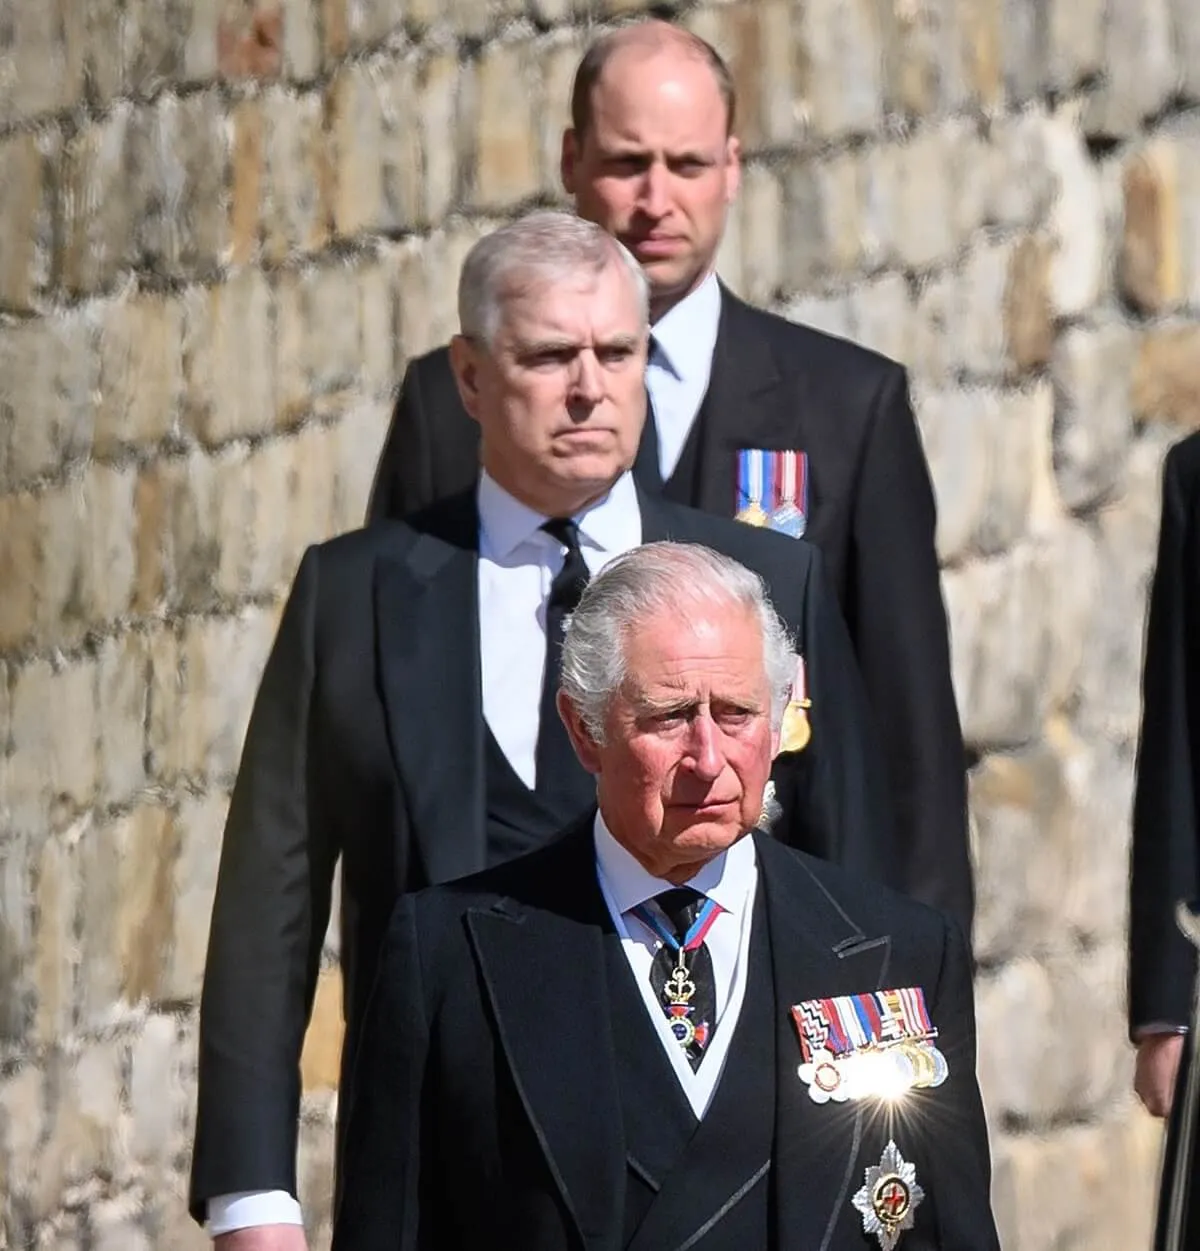 King Charles III, Prince Andrew, and Prince William during the funeral of Prince Philip at Windsor Castle